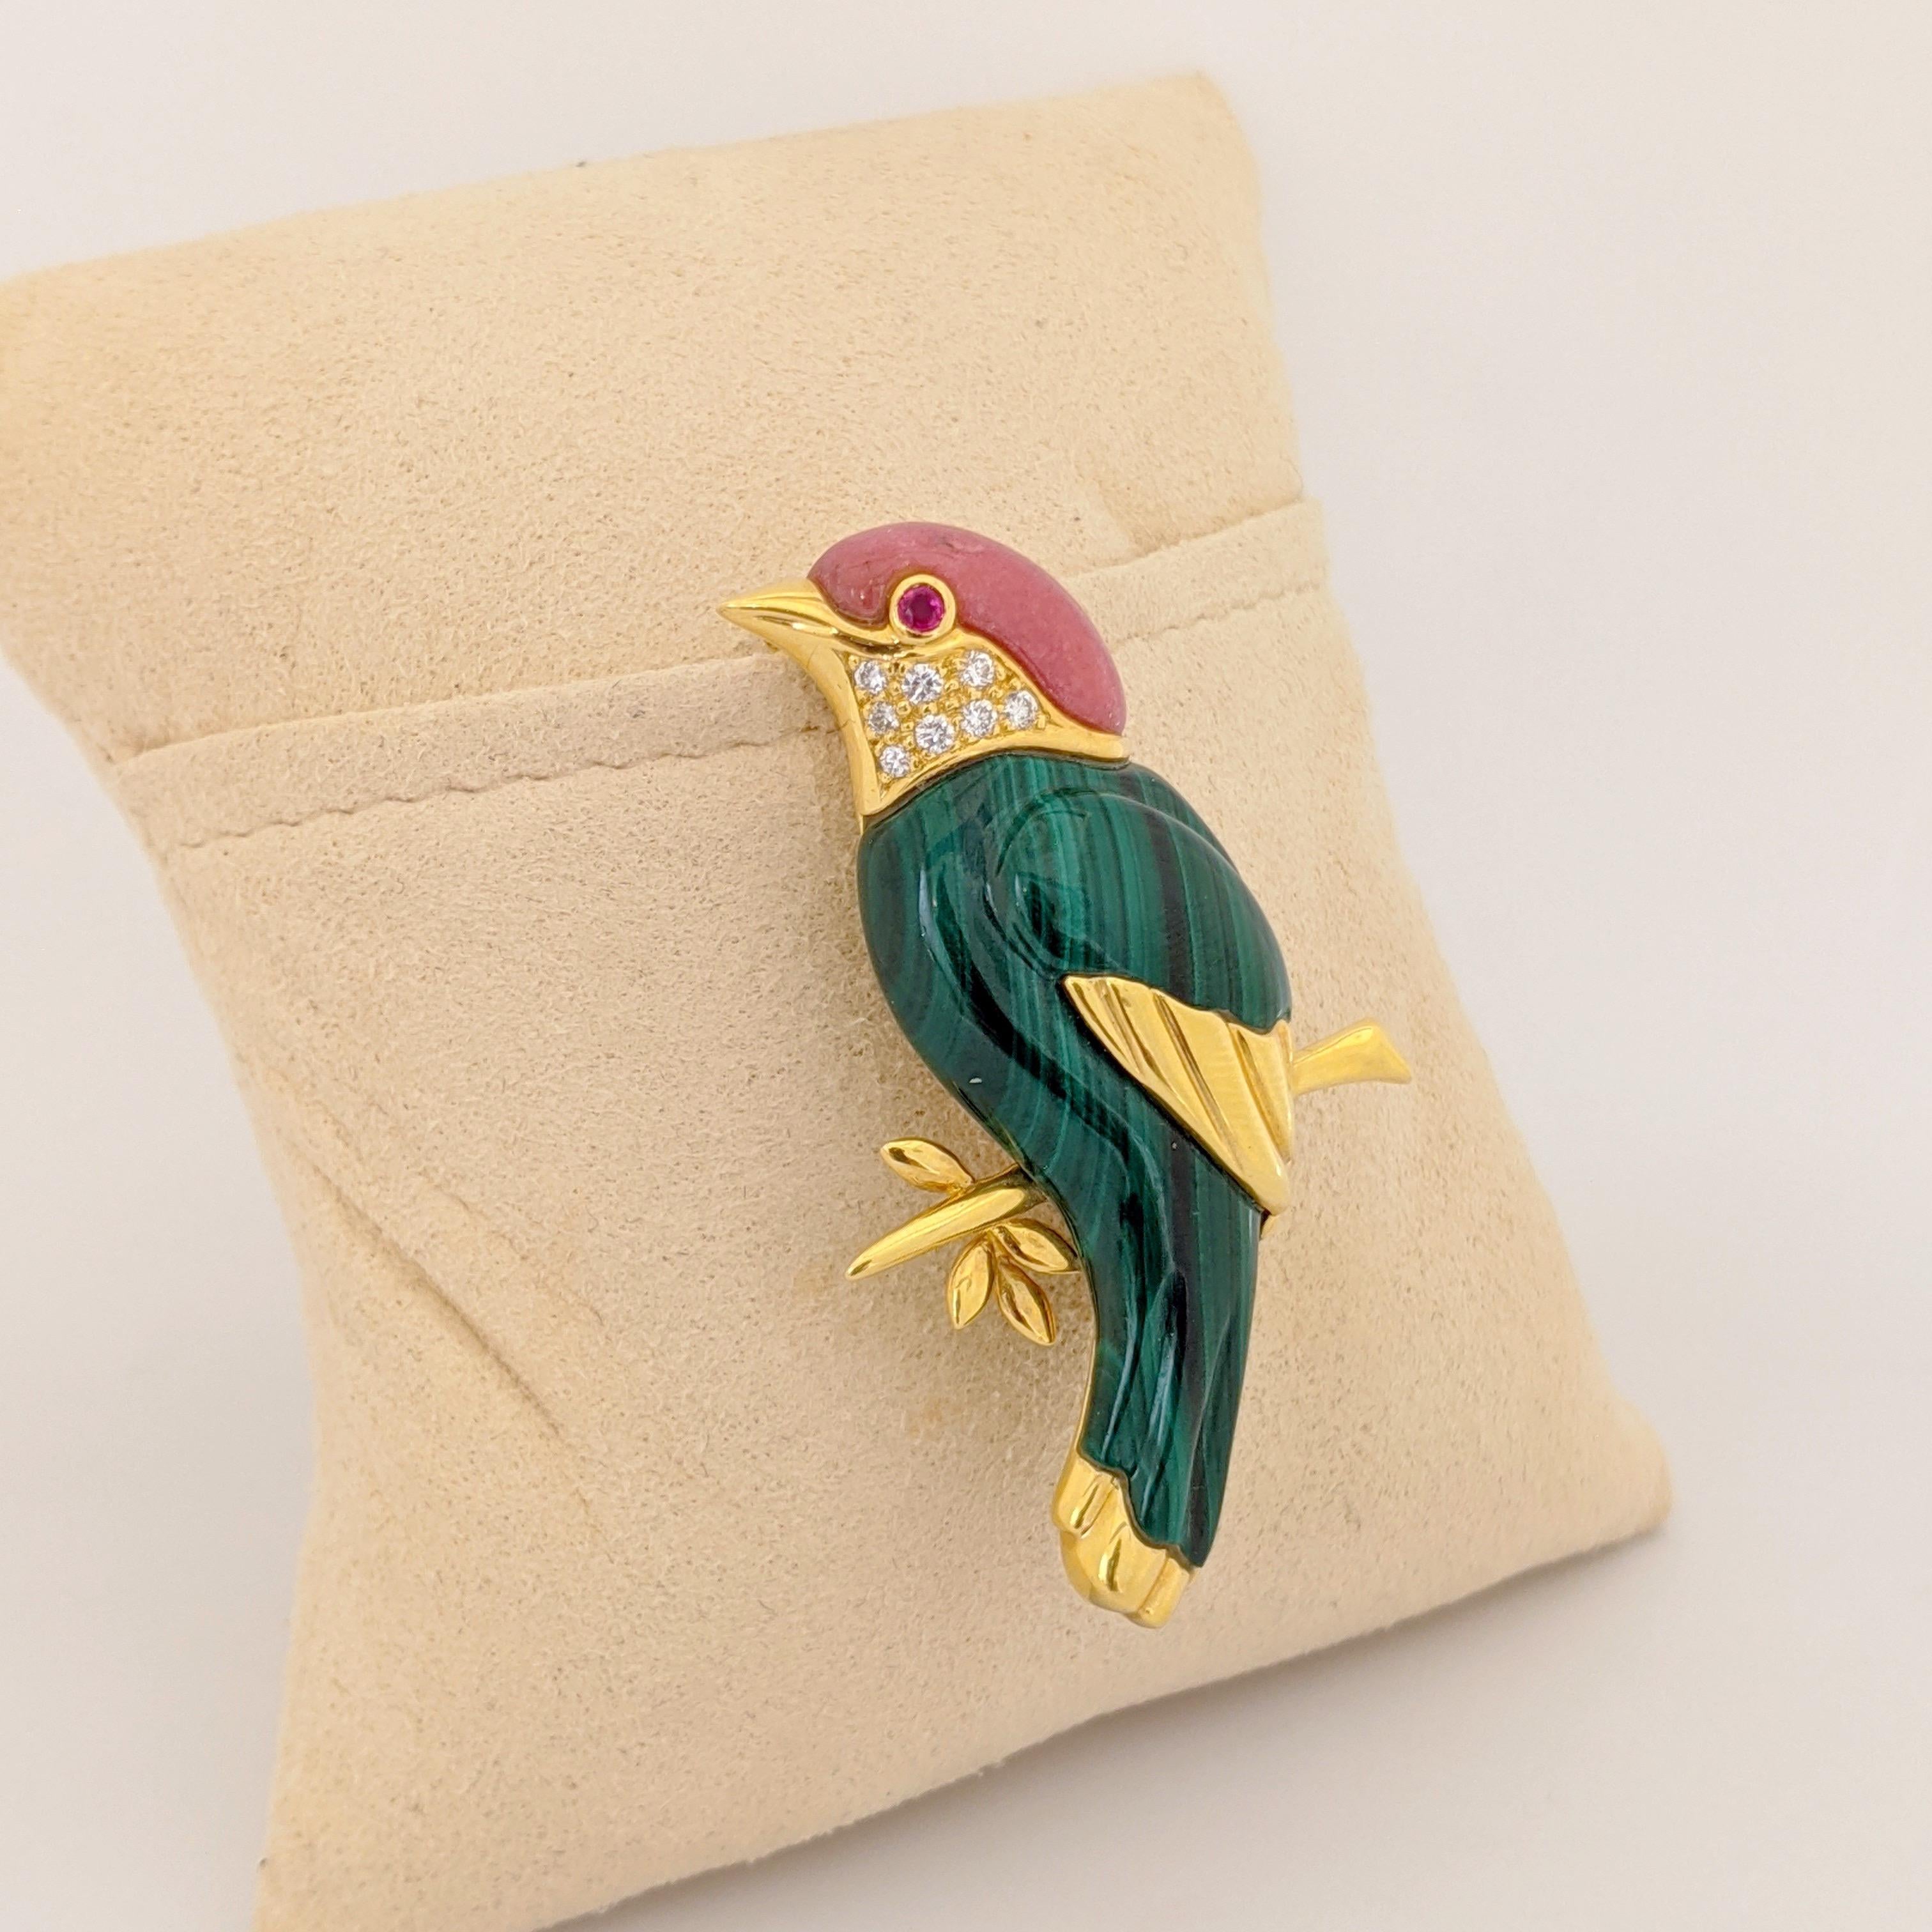 This lovely  18 Karat yellow gold Sparrow brooch is artfully crafted with carved Malachite , Pink Agate, and Diamonds. The sparrow has a ruby eye. The length of the brooch is 2